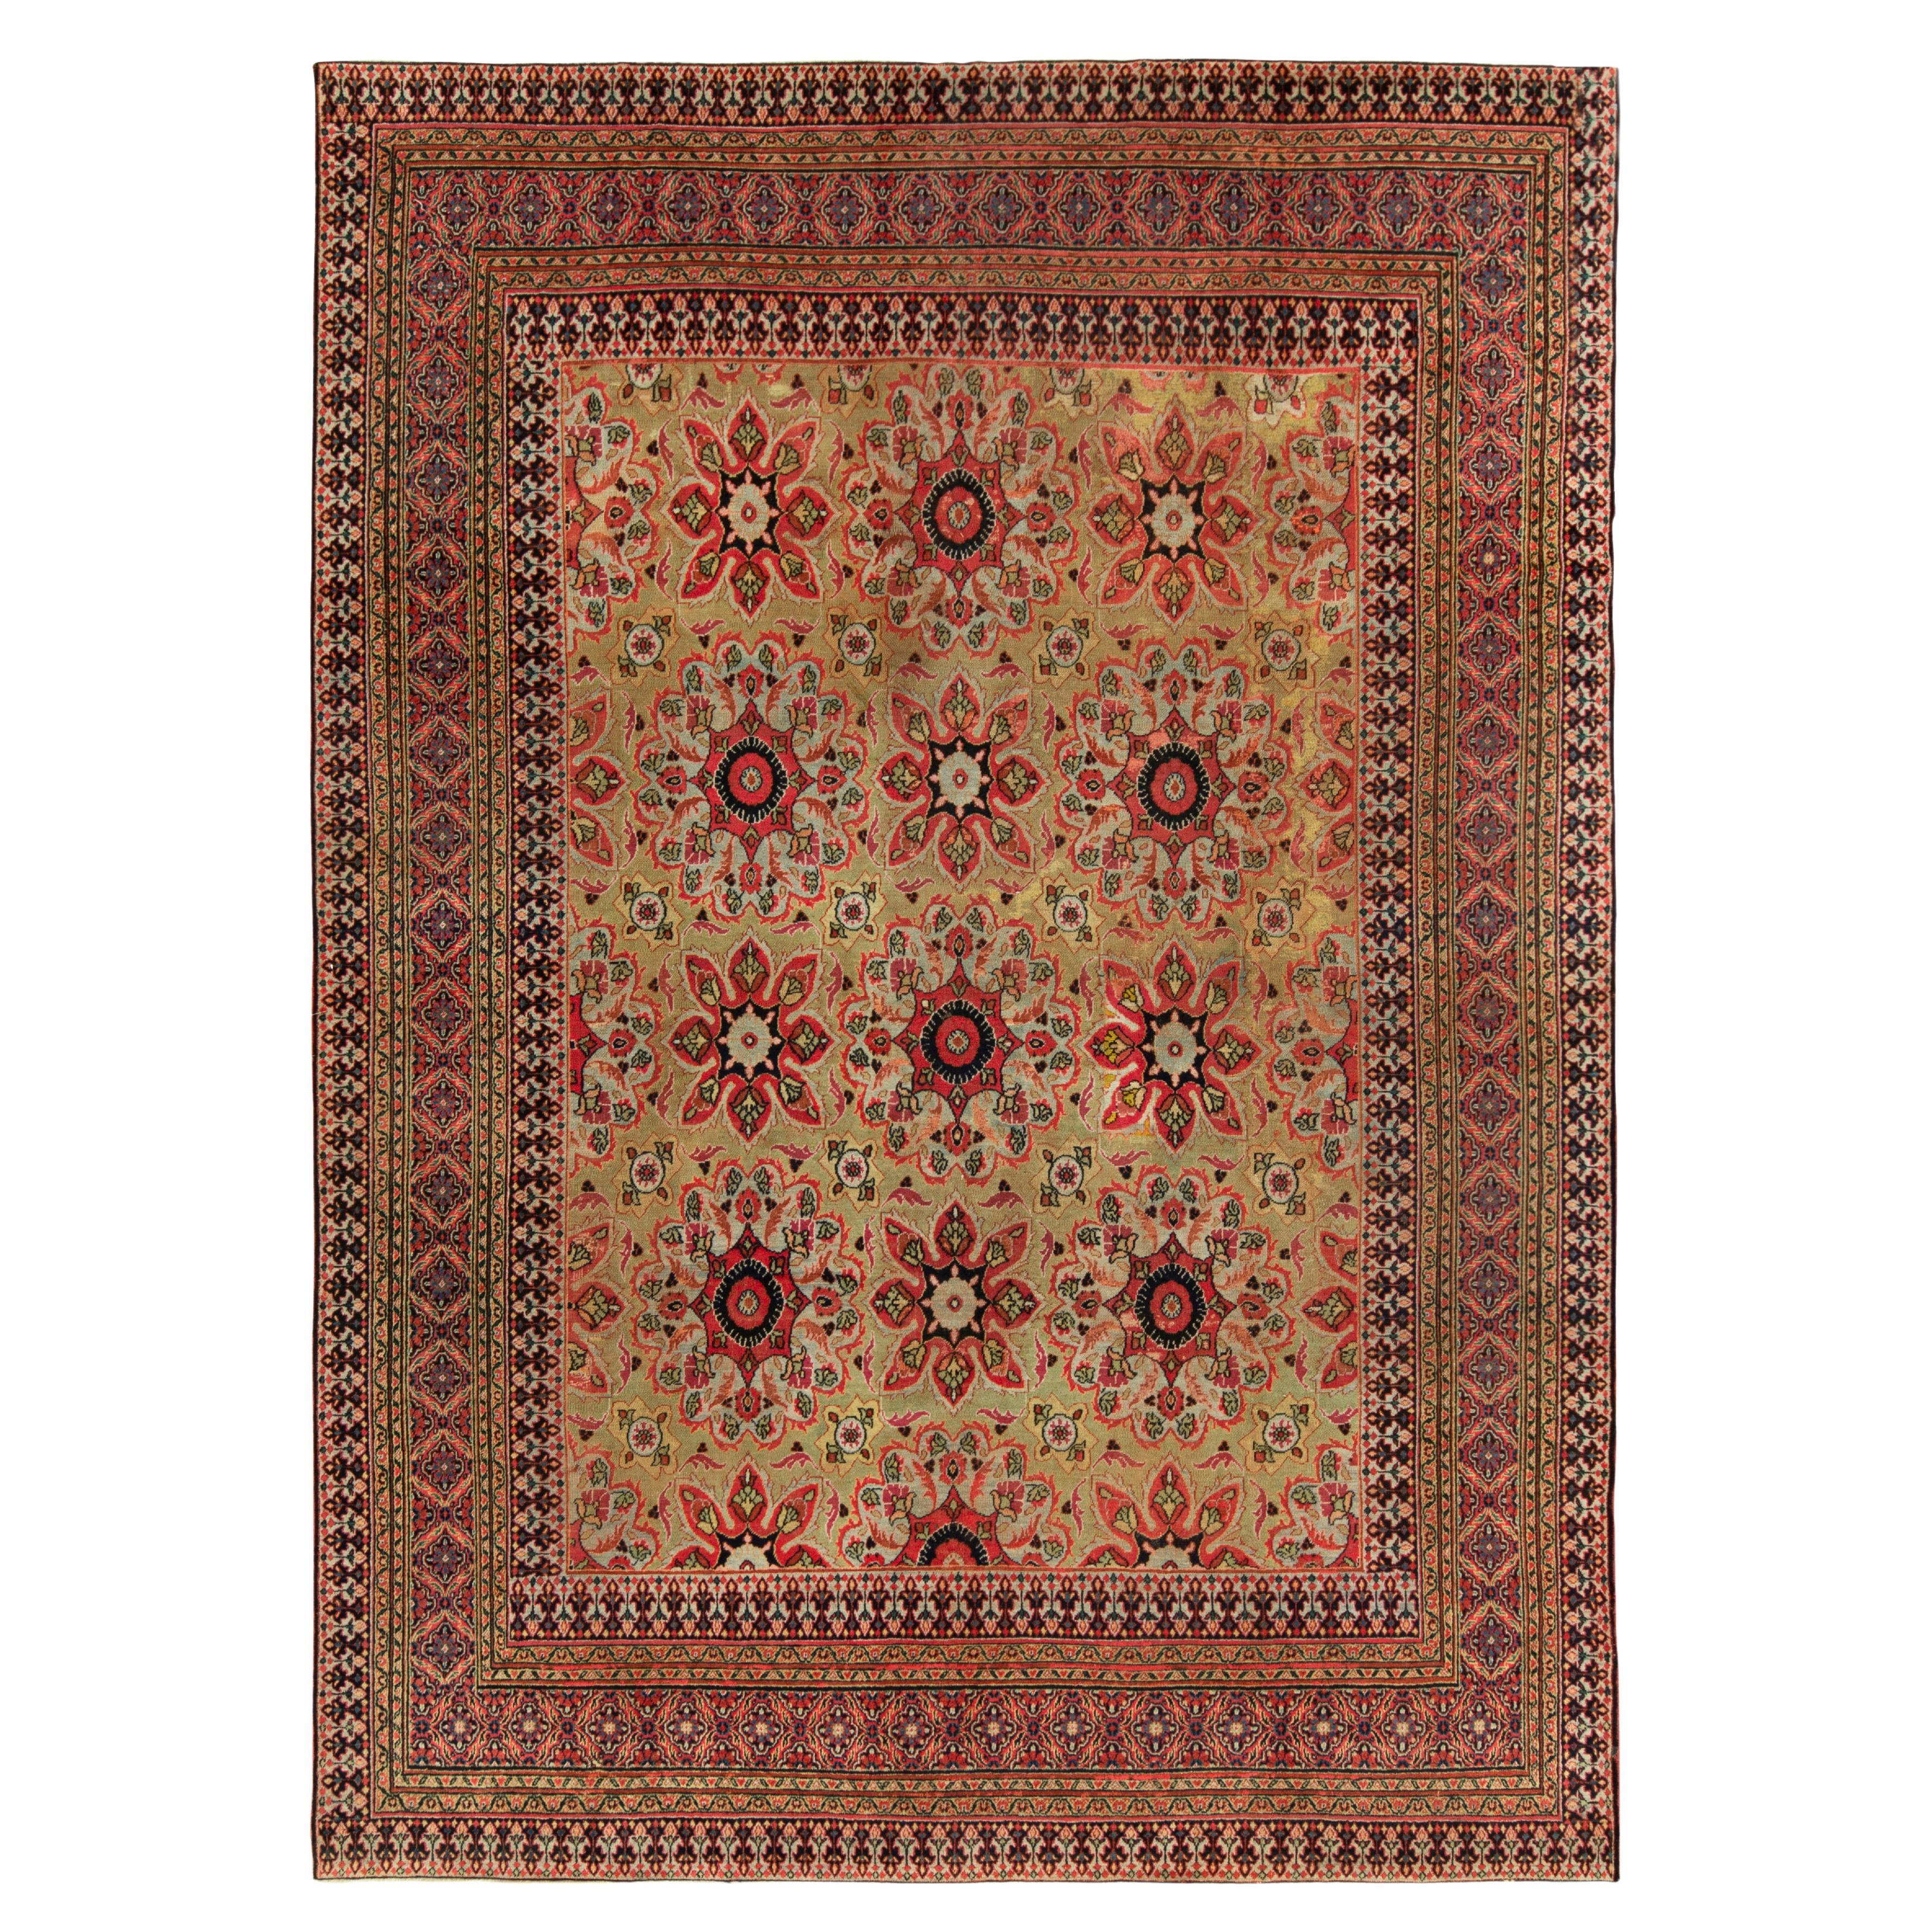 Antique Khorassan Rug in All over Red, Green Floral Pattern by Rug & Kilim For Sale